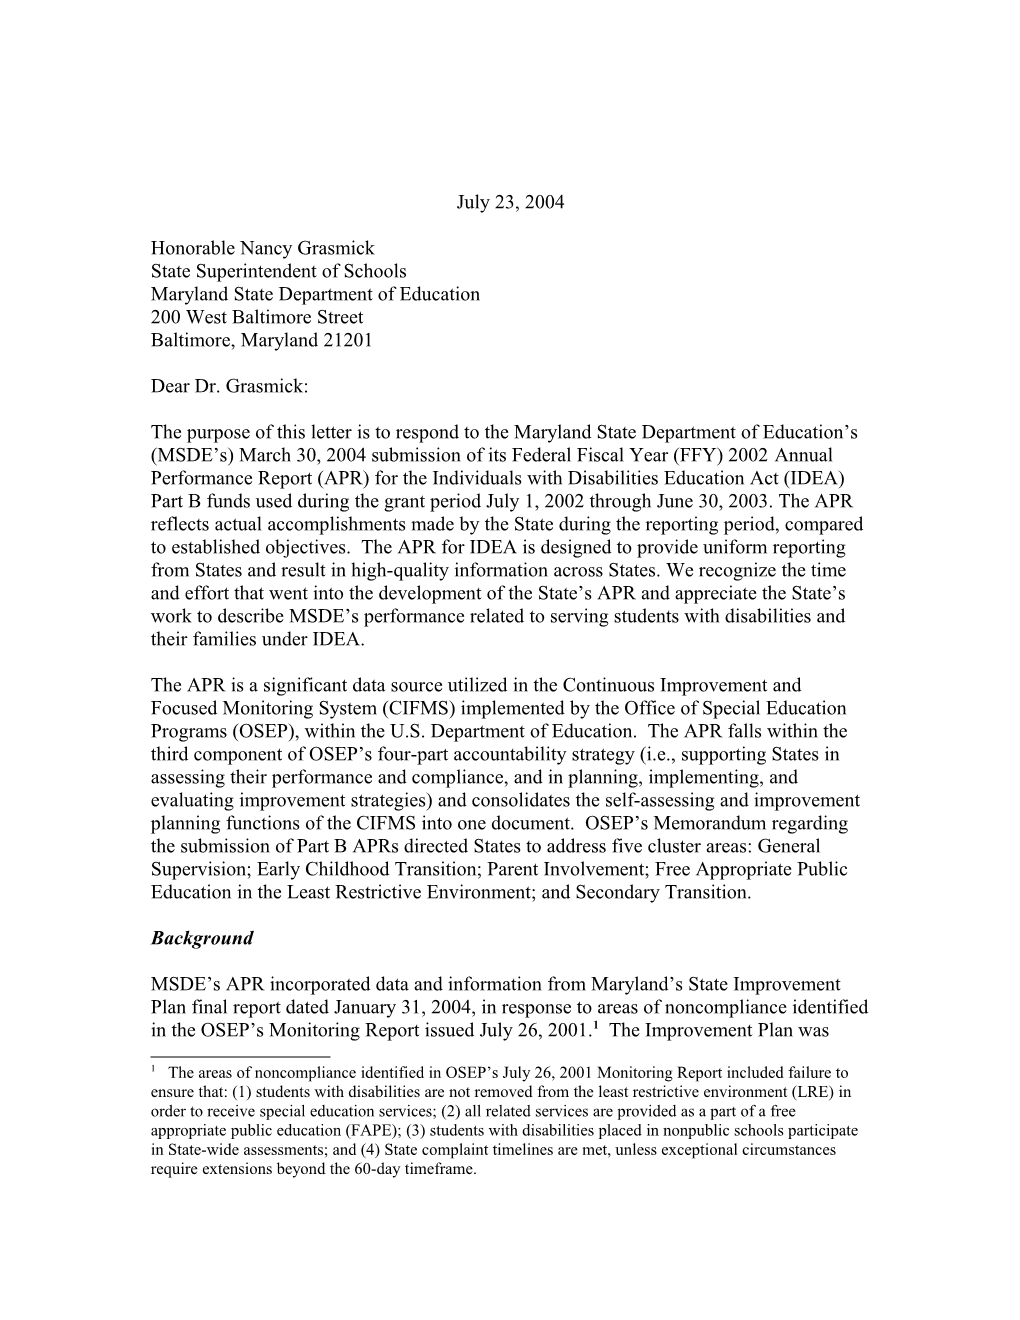 Maryland Part B APR Letter, 2002-2003 (MS Word)